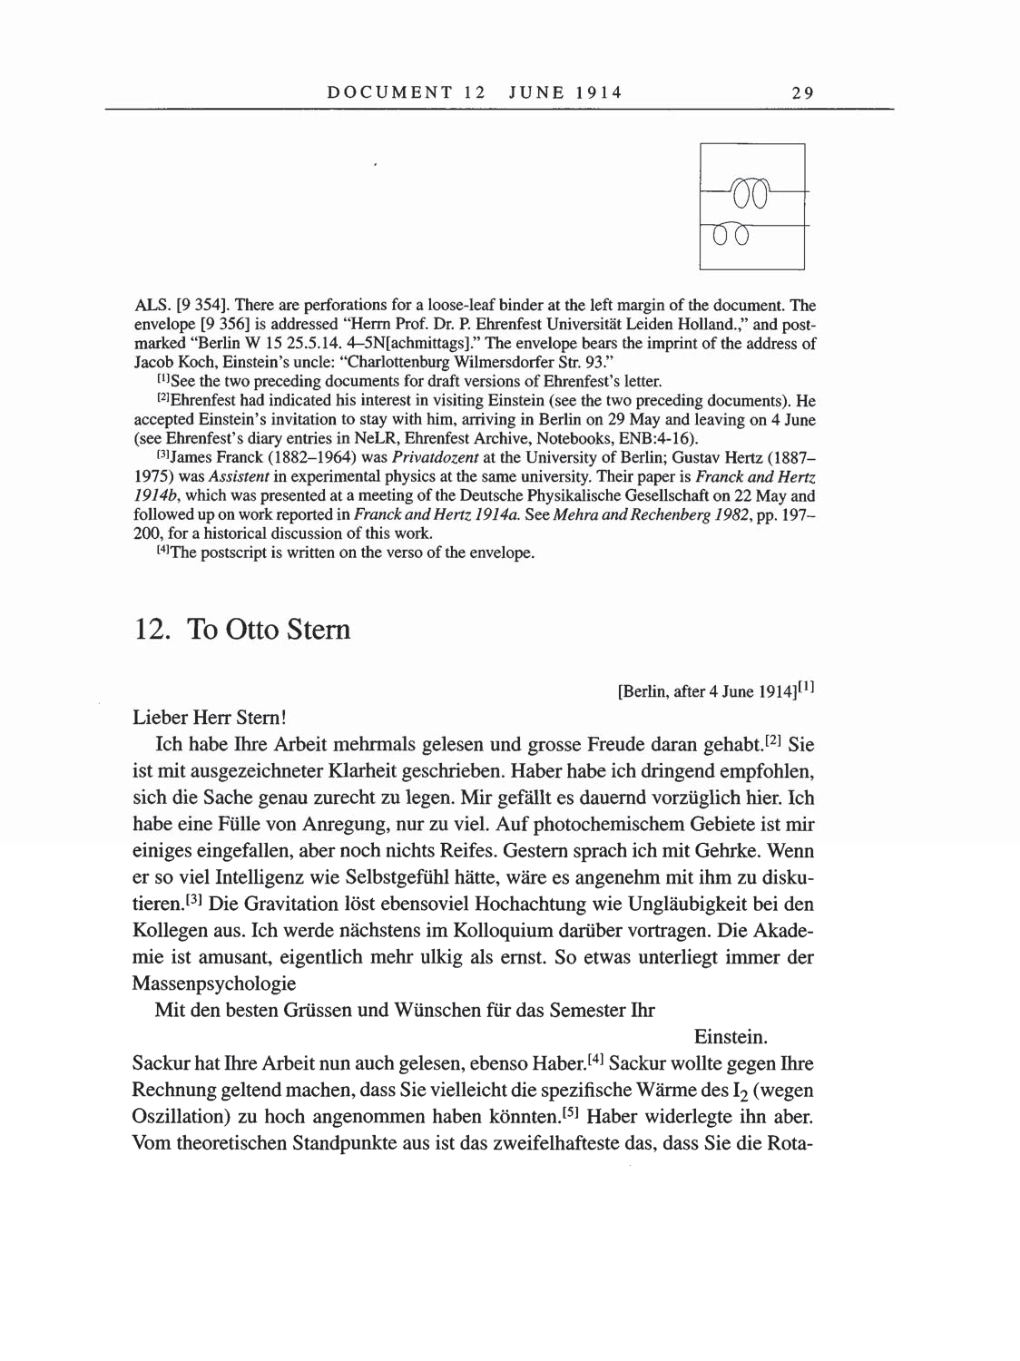 Volume 8, Part A: The Berlin Years: Correspondence 1914-1917 page 29